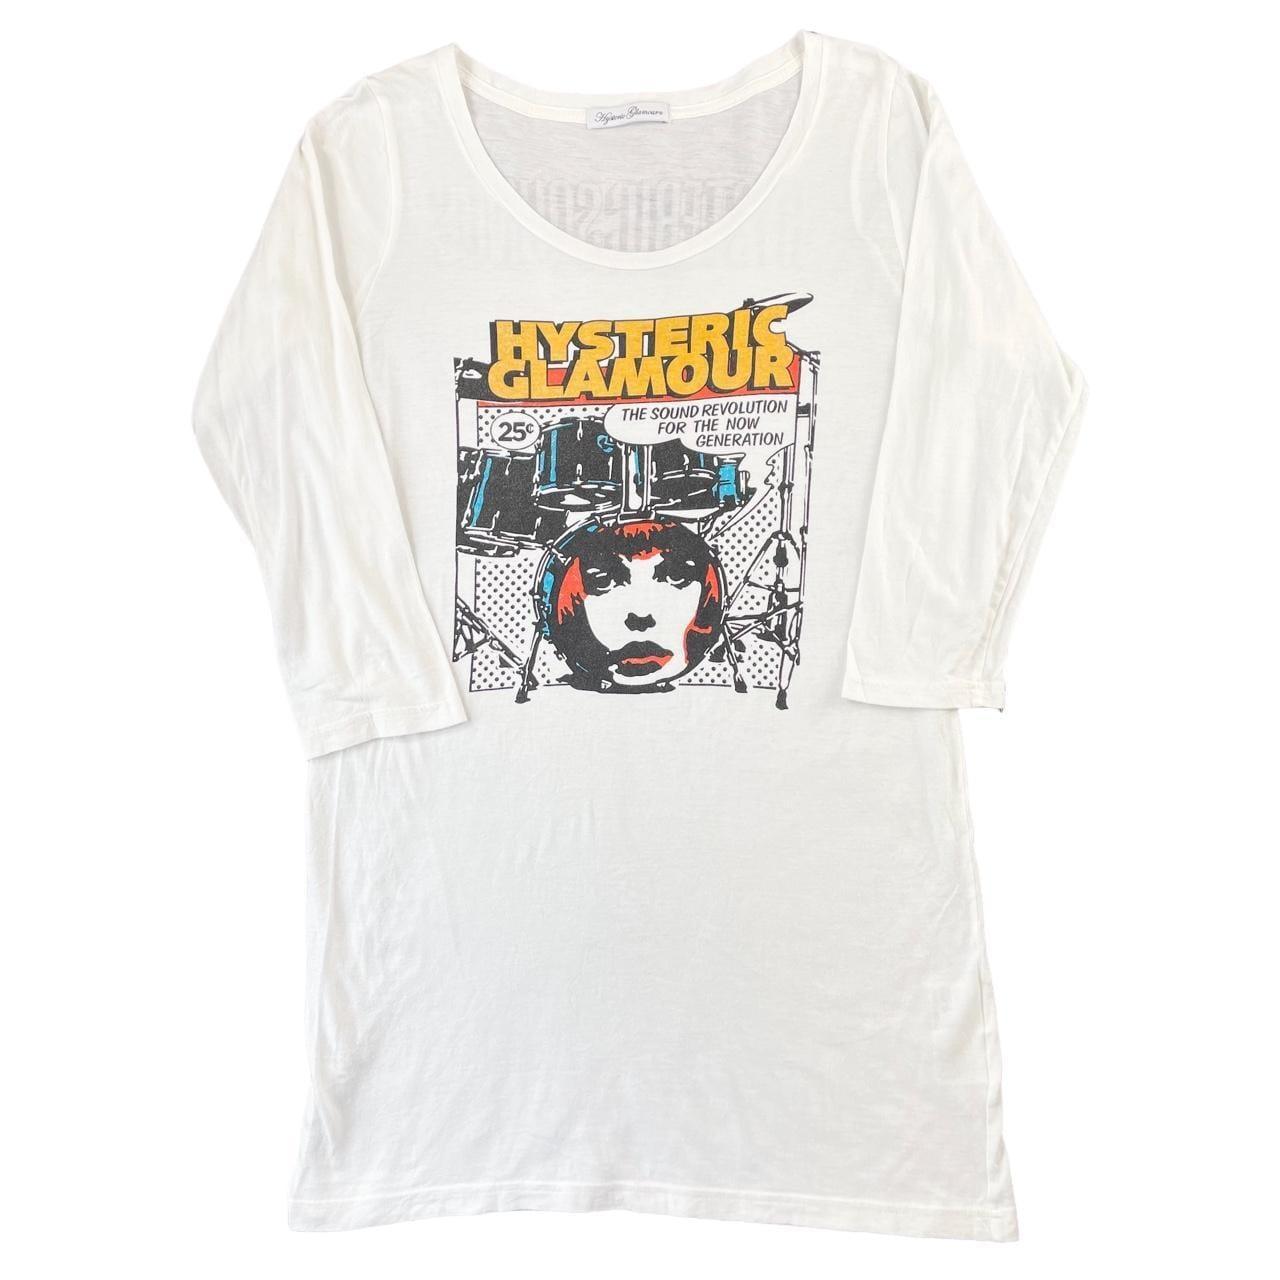 Vintage Hysteric Glamour long t shirt woman’s size L - Known Source